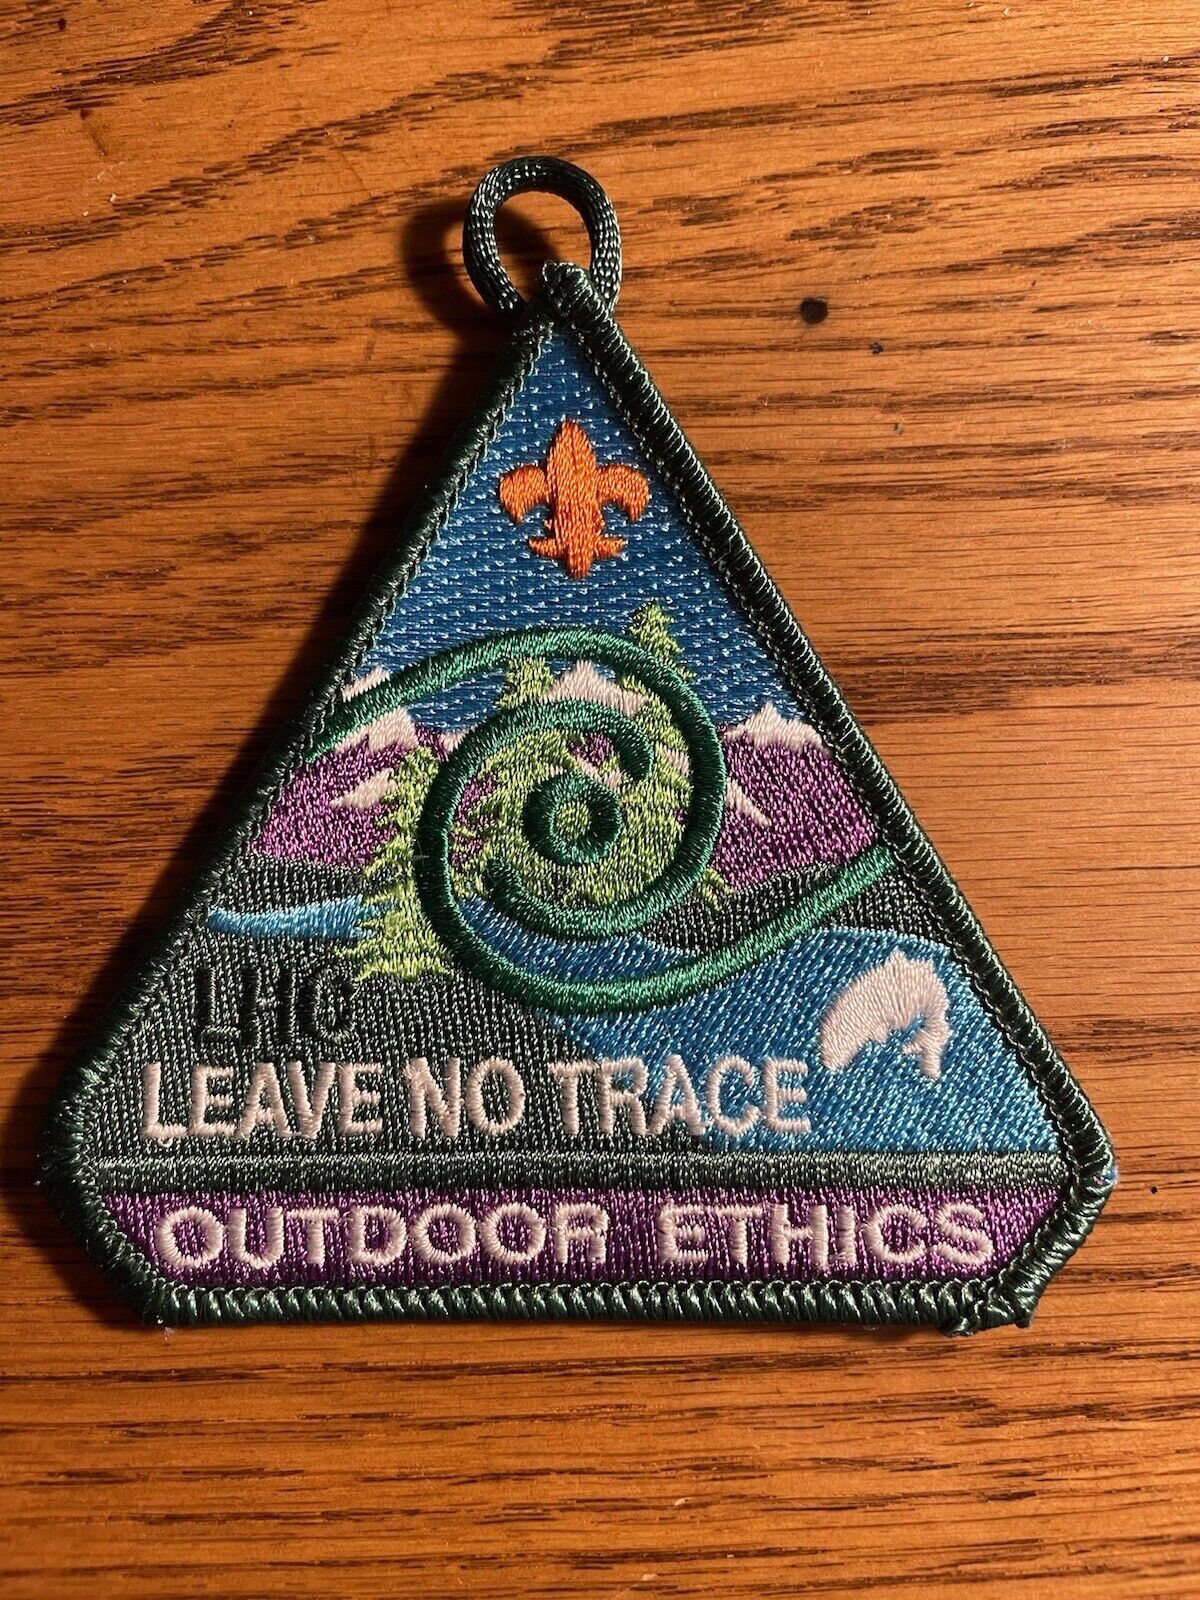 Scouting Leave No Trace Outdoor Ethics Pocket Patch